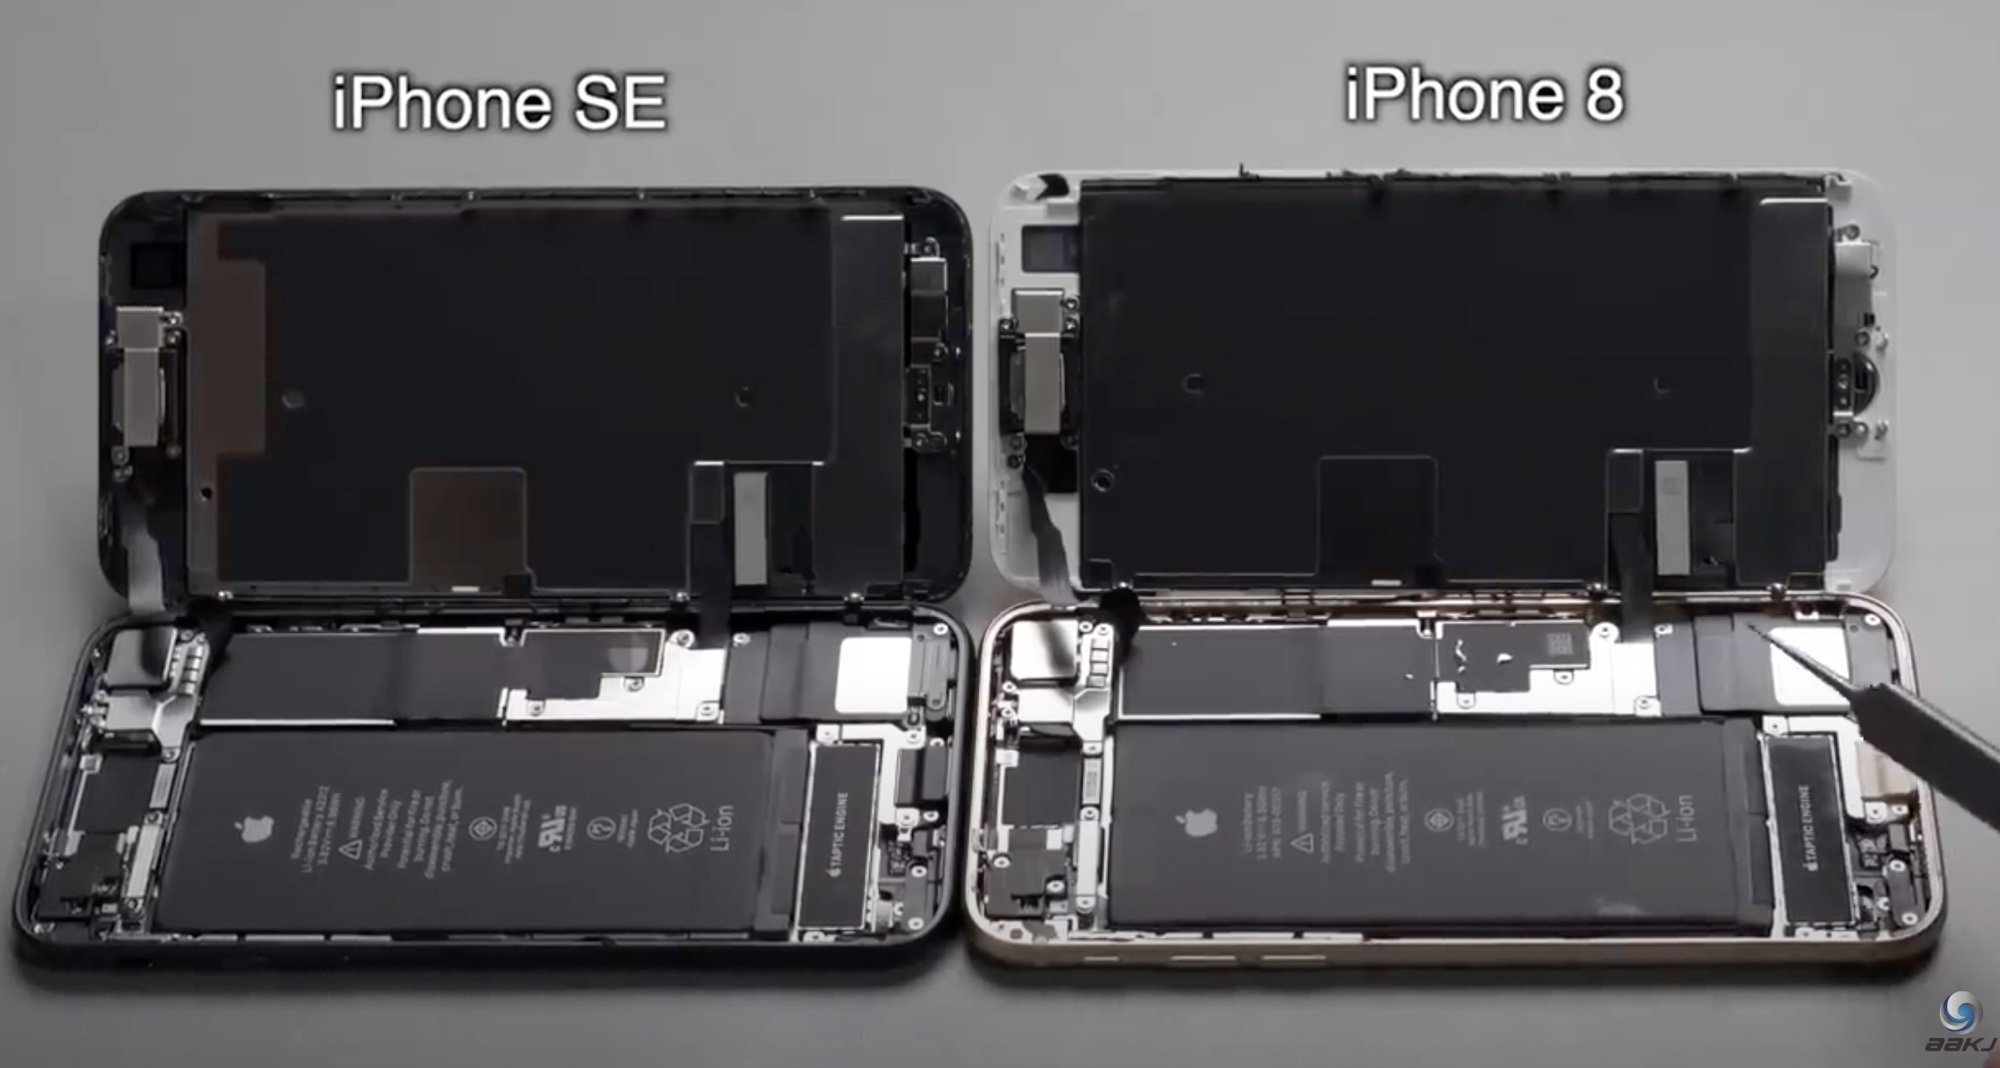 Teardown Video Compares New iPhone SE to iPhone 8